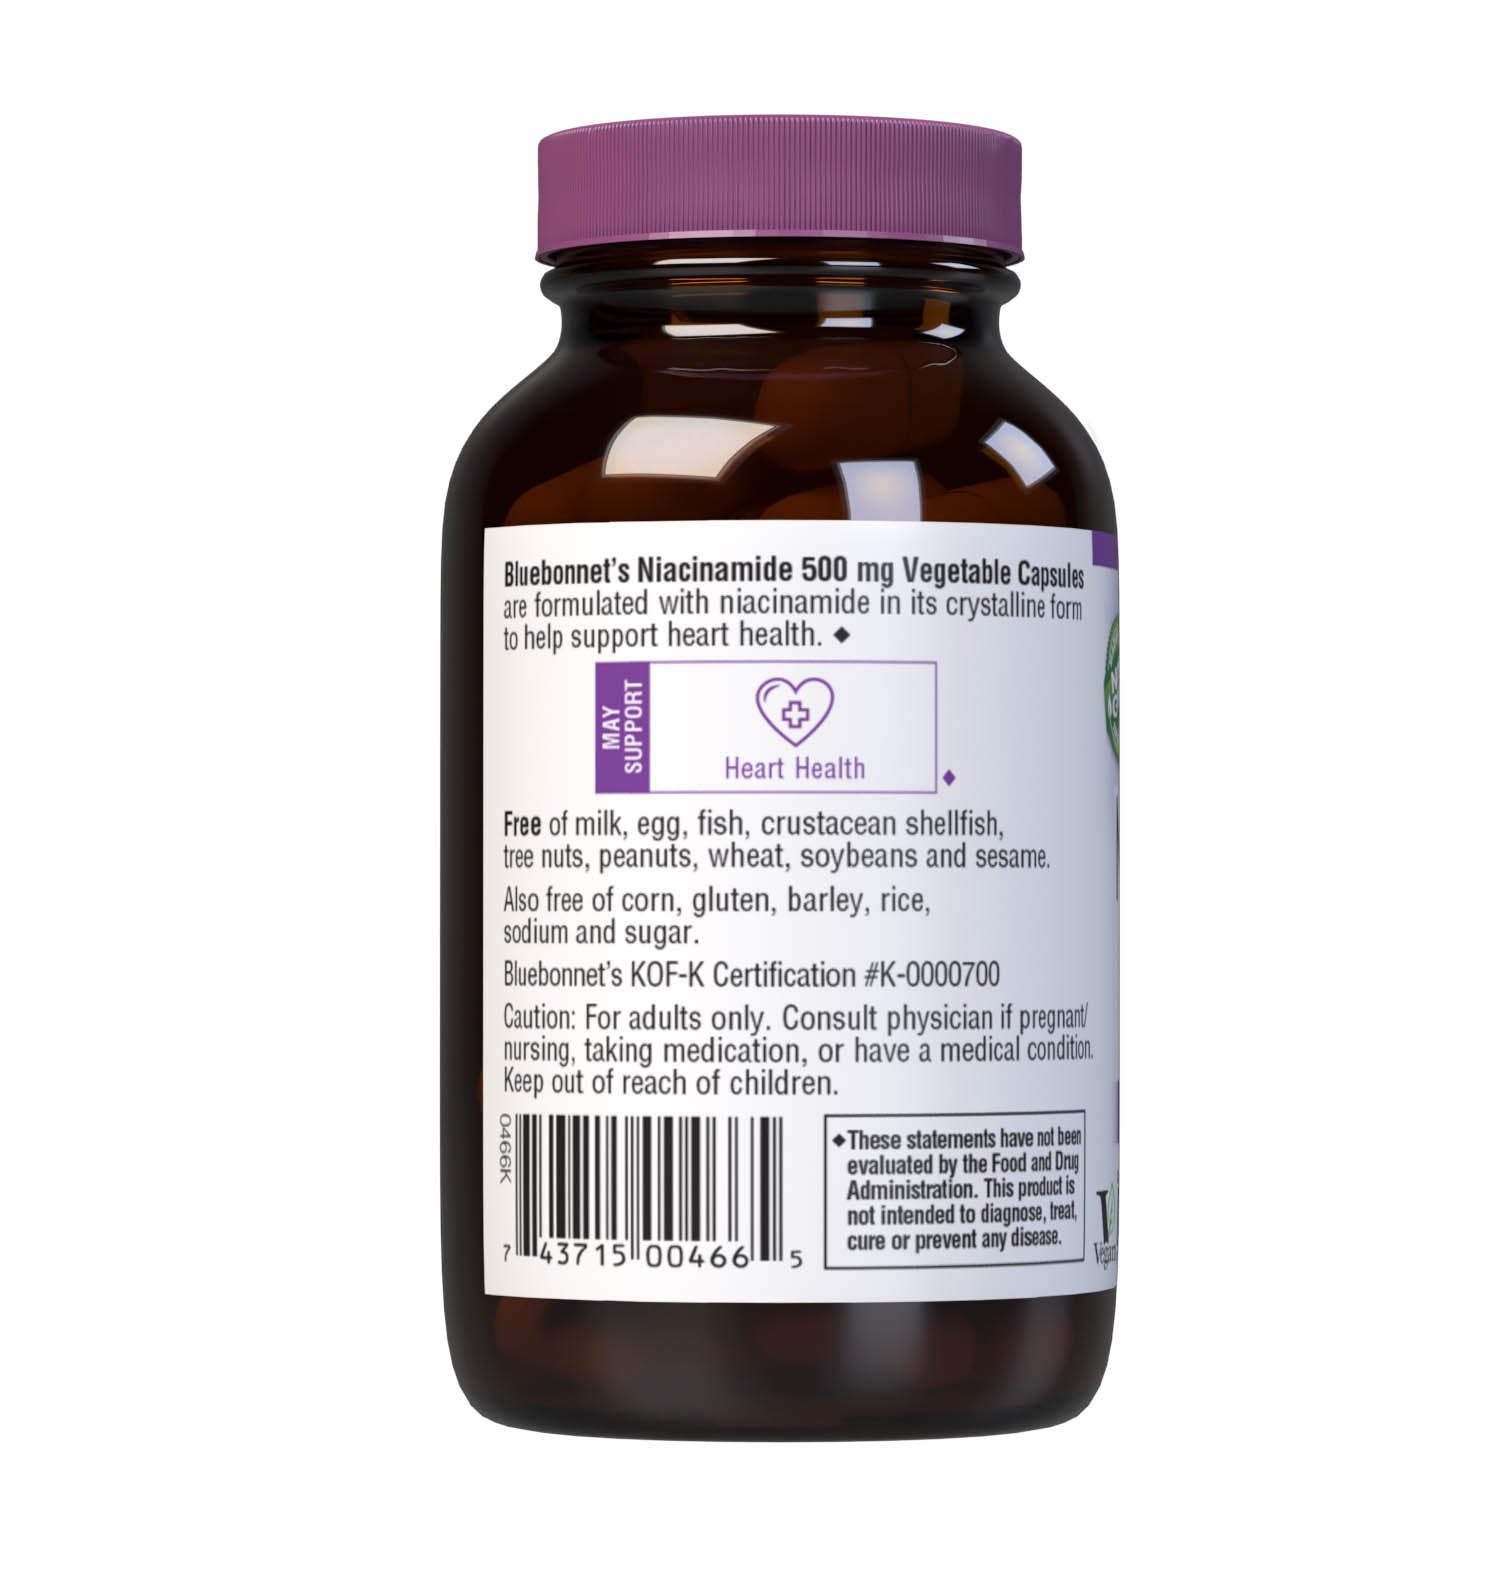 Bluebonnet’s Niacinamide 500 mg Vegetable Capsules are formulated with niacinamide in its crystalline form to help support heart health. Description panel. #size_60 count